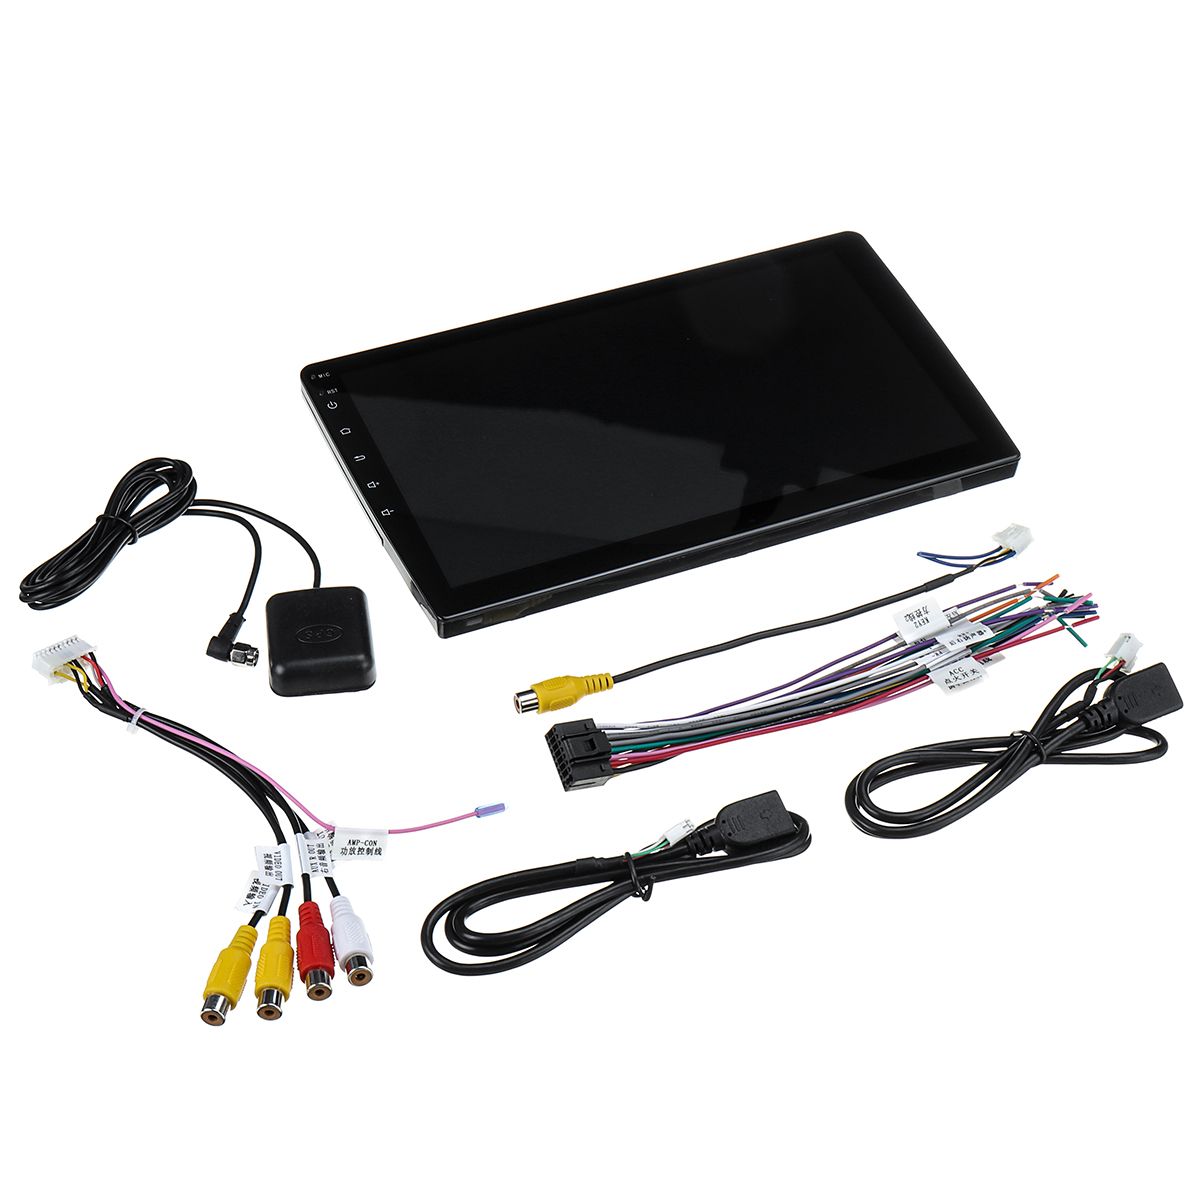 90-inch-2Din-For-Android-81-Car-Radio-Stereo-Mutimedium-Player--4-Core-2GB32GB-GPS-4G-bluetooth-WiFi-1650259